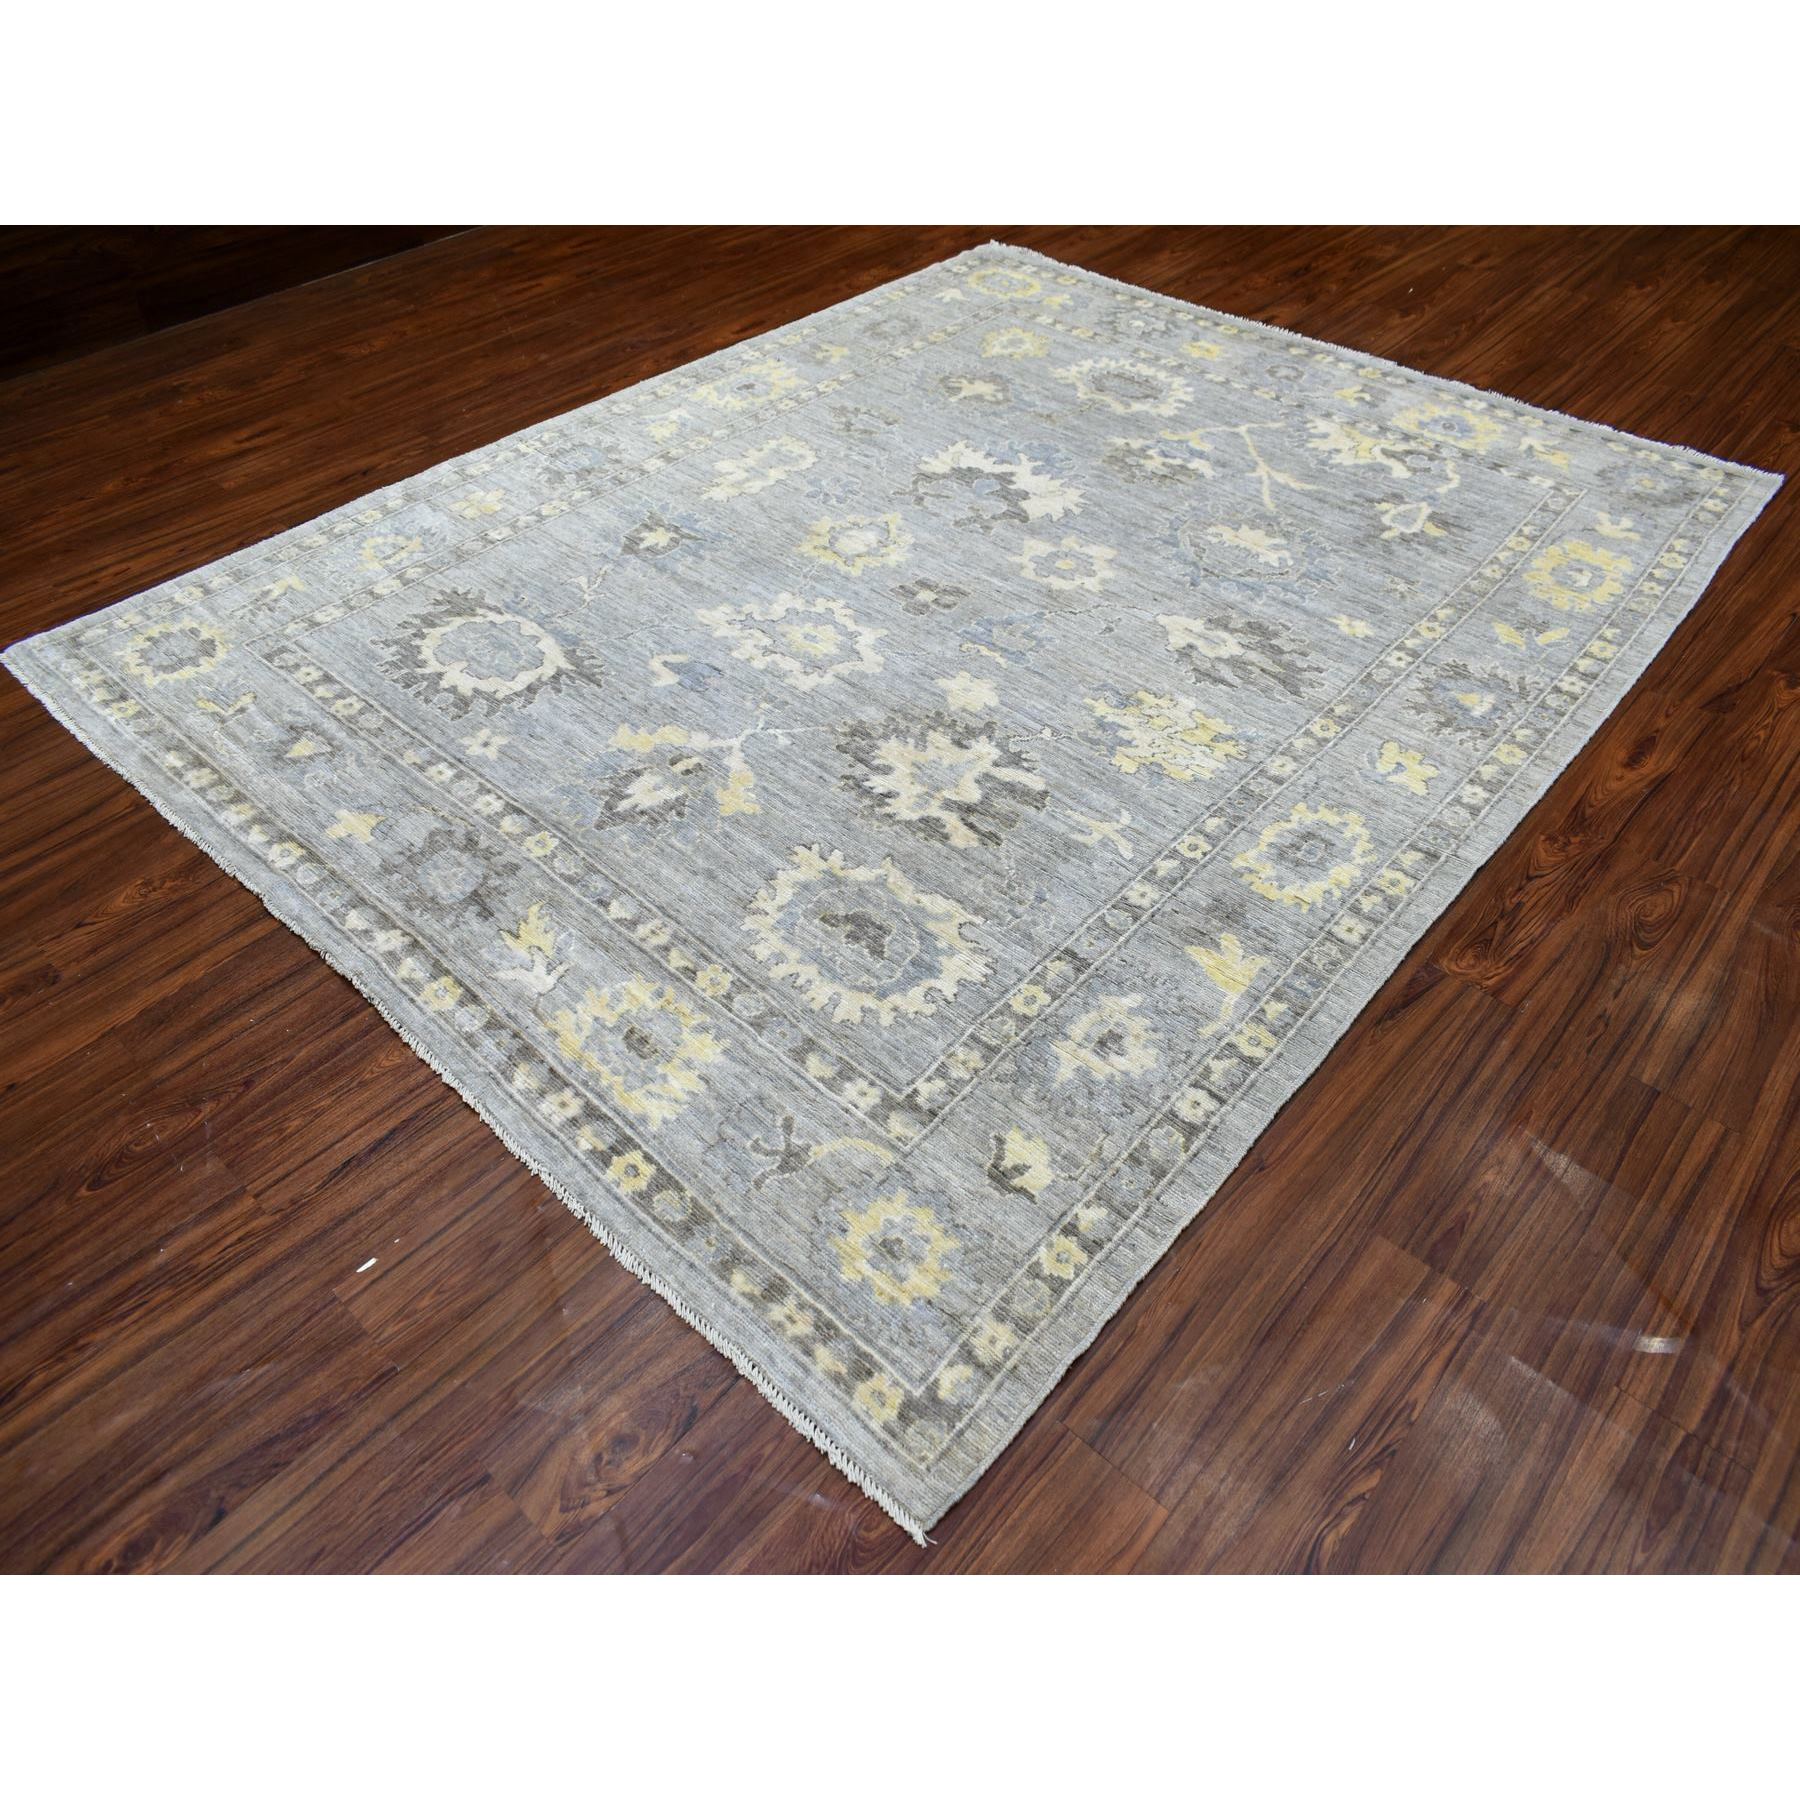 8'x9'10" Hand Woven Gray Afghan Angora Ushak With Floral Eye Catching Pattern Soft Wool Oriental Rug 